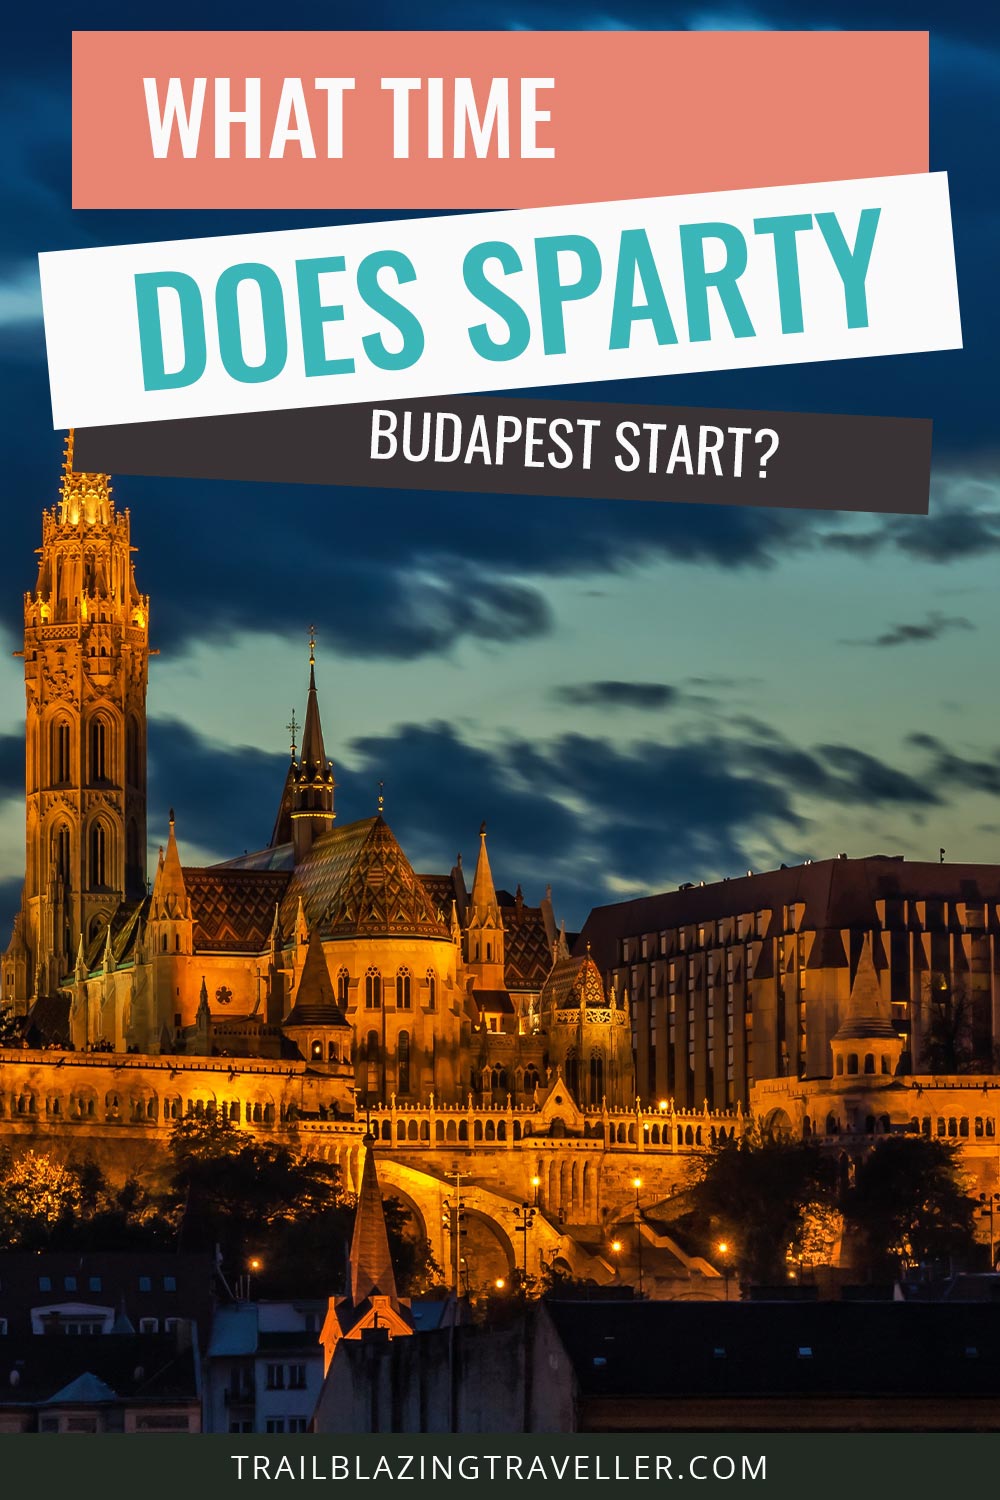 Matthias Church - What Time Does Sparty Budapest Start?